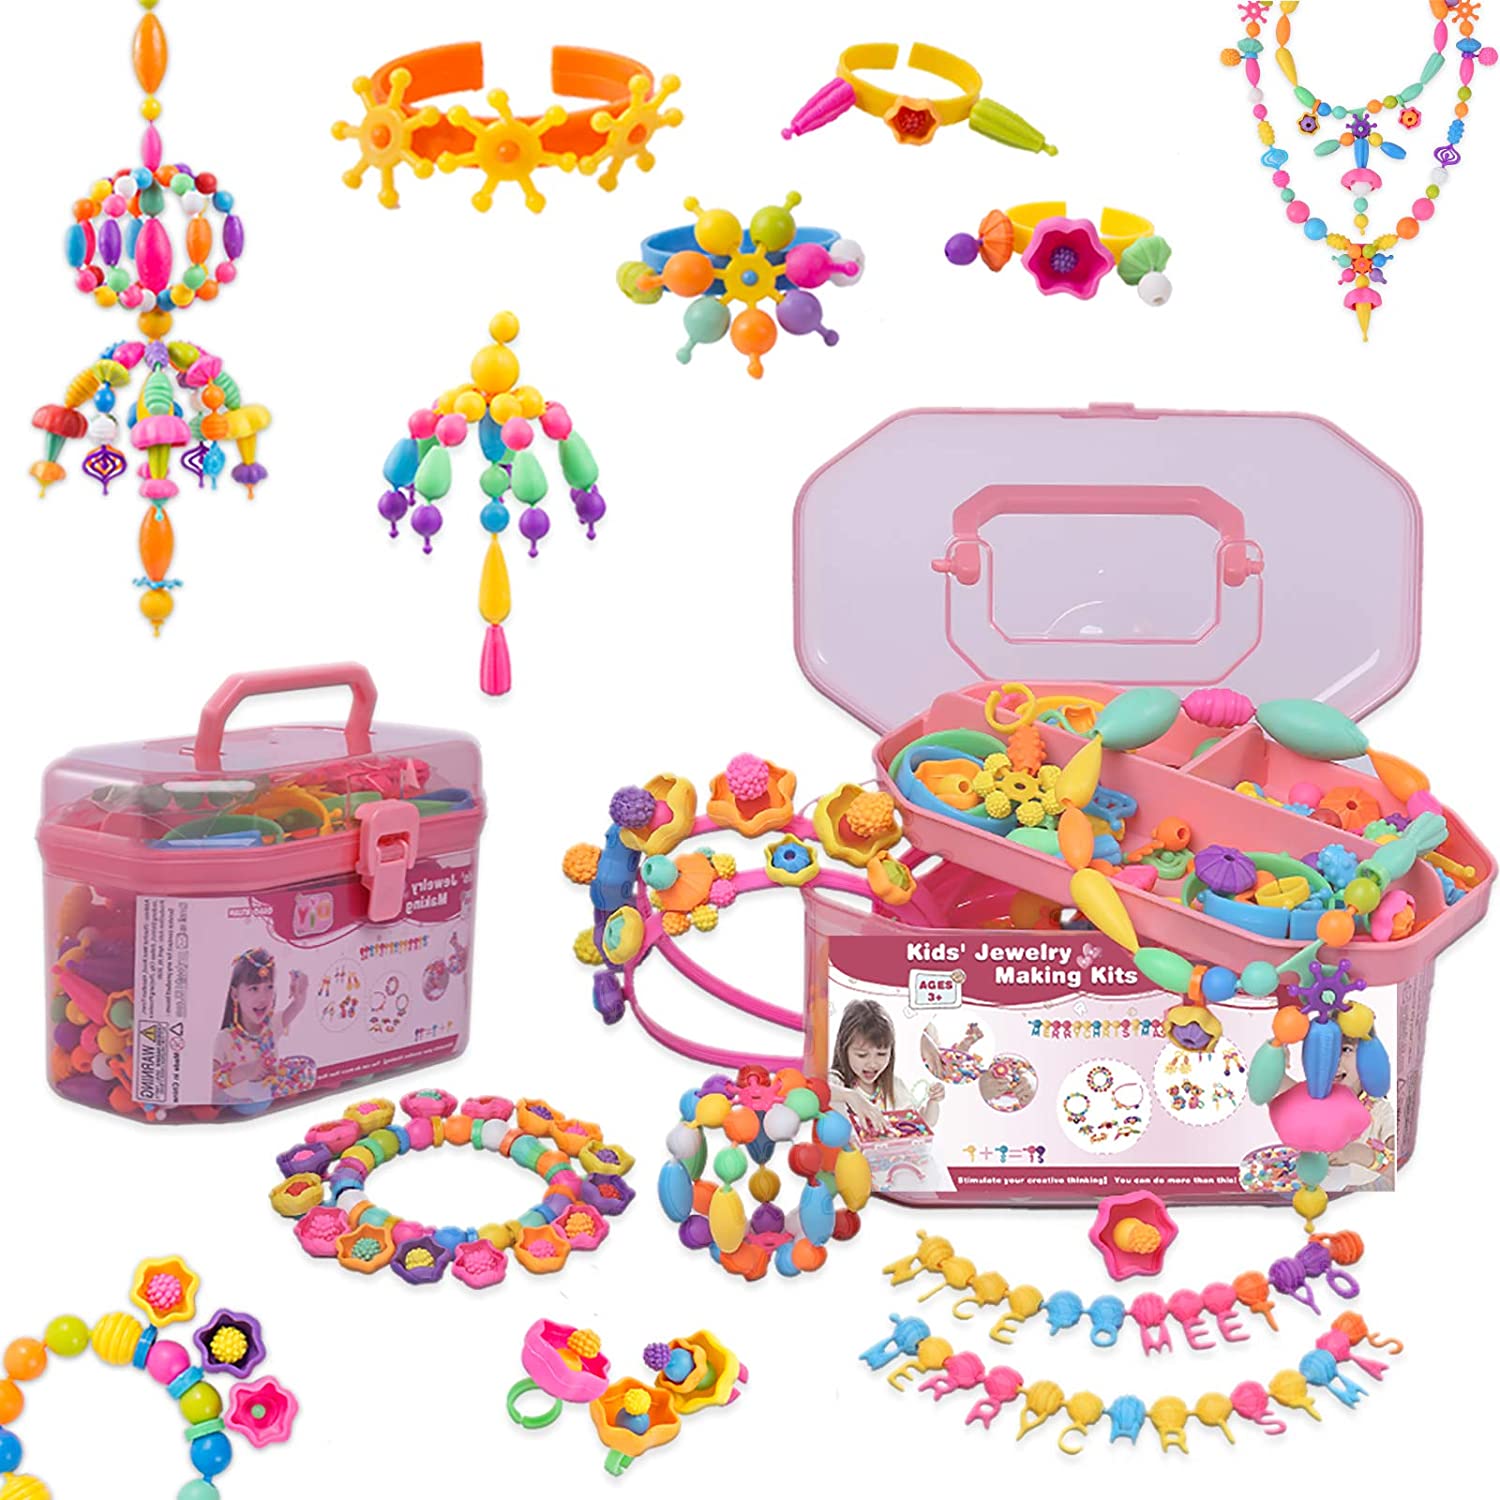 Dsoar Pop Beads for Kids 650PCS Art DIY Beads Toy Kits Set Jewelry Making DIY Necklace Bracelet Ring Colorful Acrylic Beads 